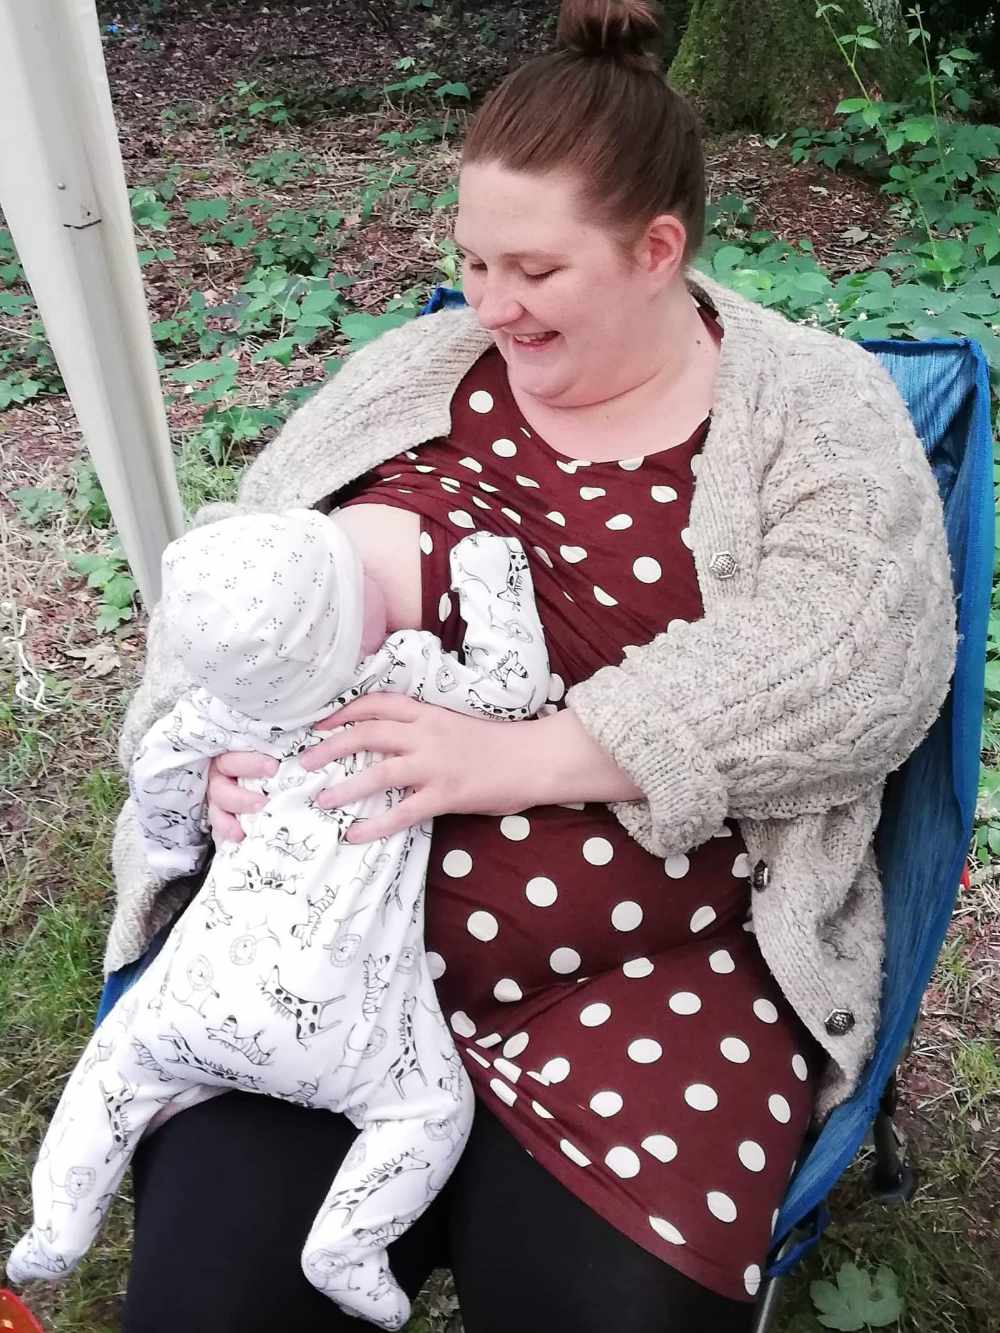 Breastfeeding With Large Breasts - Breastfeeding Support